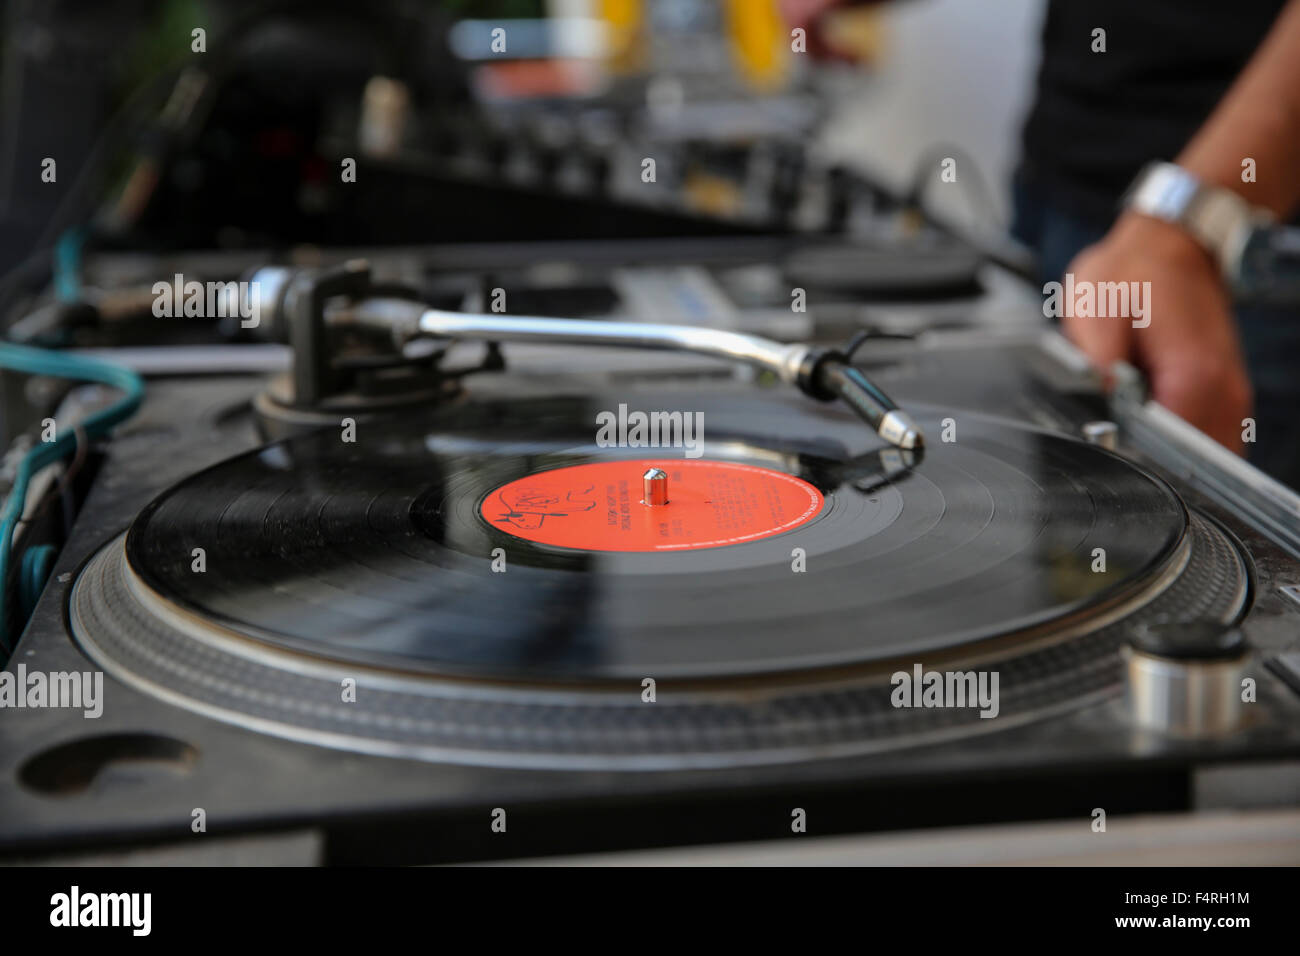 A disk jockey plays music on a record player at a party Stock Photo